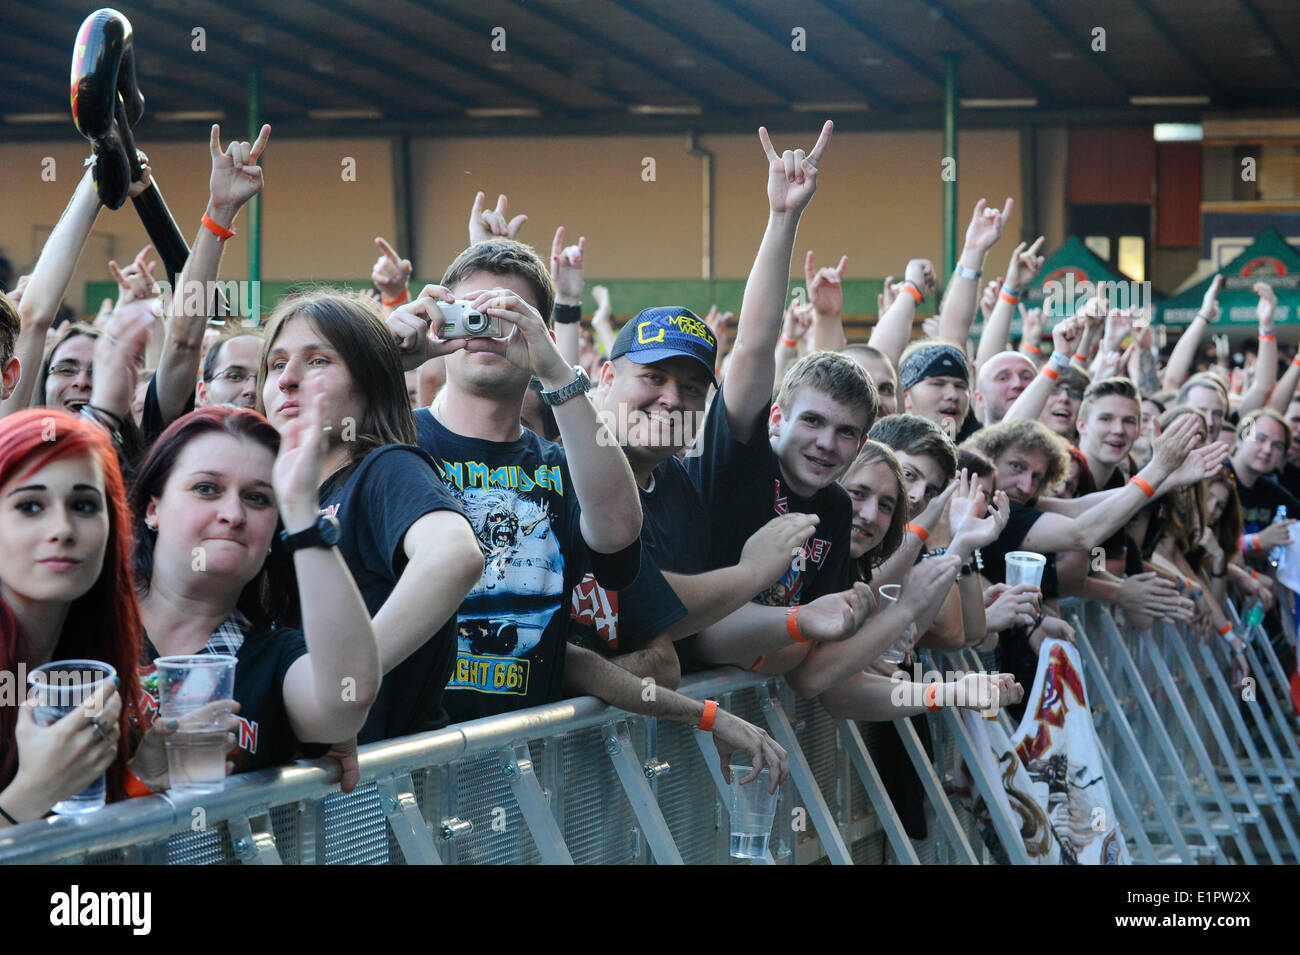 Brno, Czech Republic. 8th June, 2014. Fans of British heavymetal band Iron  Maiden pictured during the concert in Brno, Czech Republic, June 8, 2014.  The band visited Brno in the tour Maiden